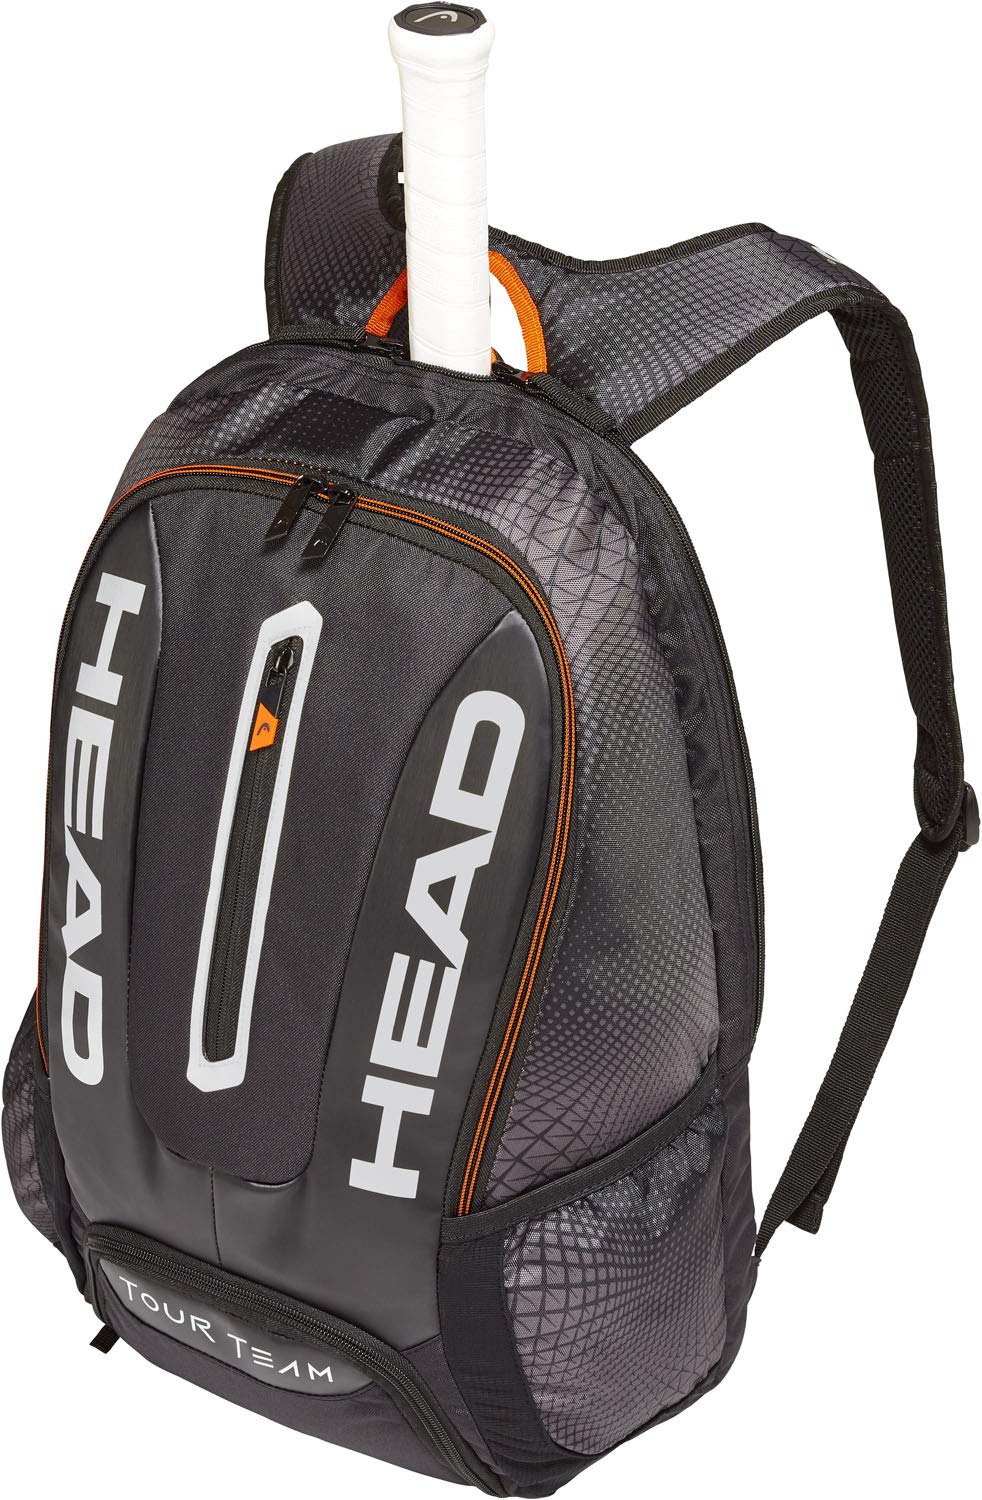 The tennis sport backpack manufacturer supplier in China